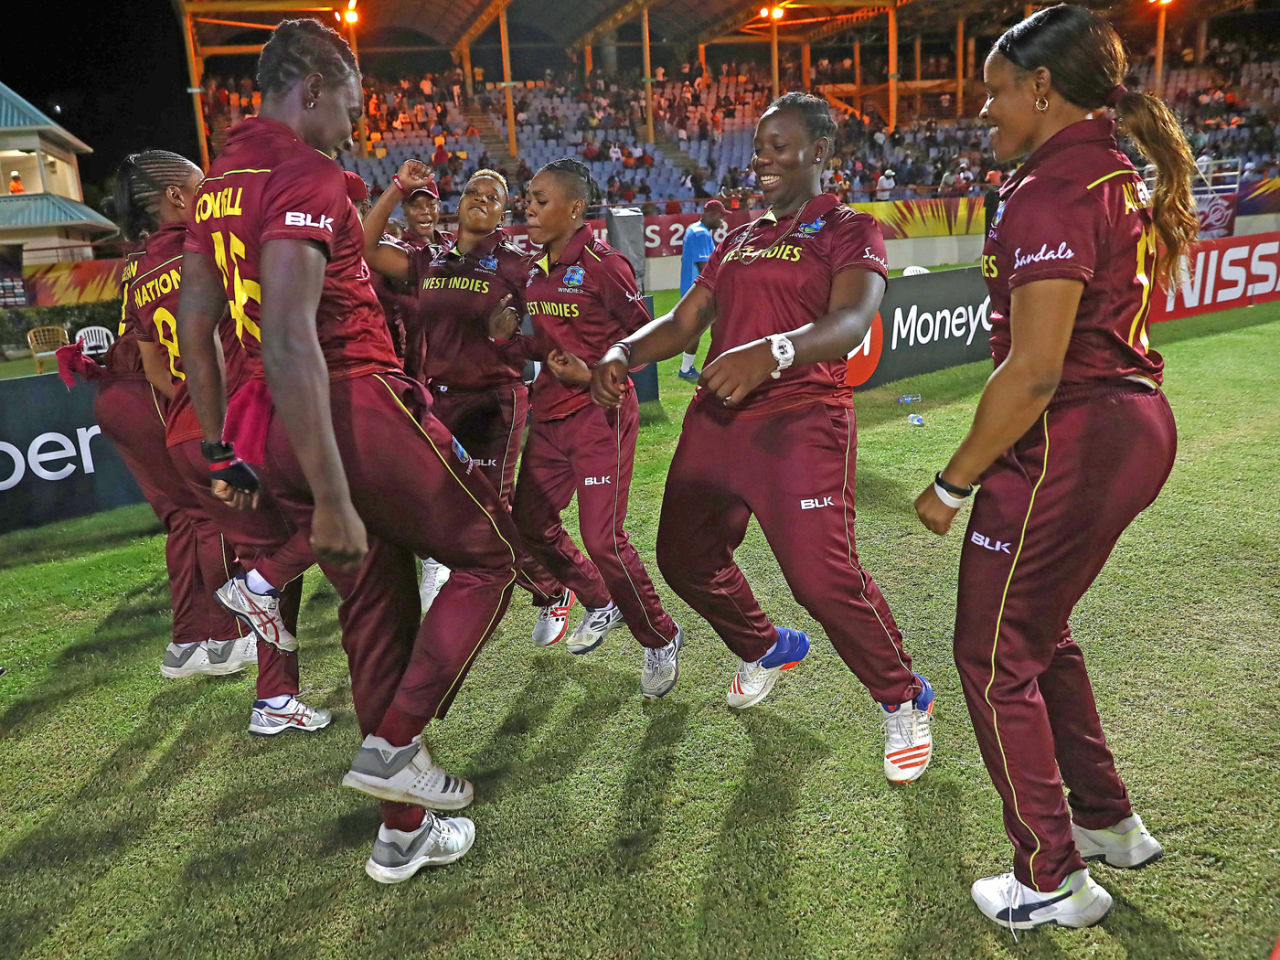 The West Indies players celebrate their win with a dance, West Indies v Sri Lanka, Group A, Women's World T20 2018, Gros Islet, November 16, 2018